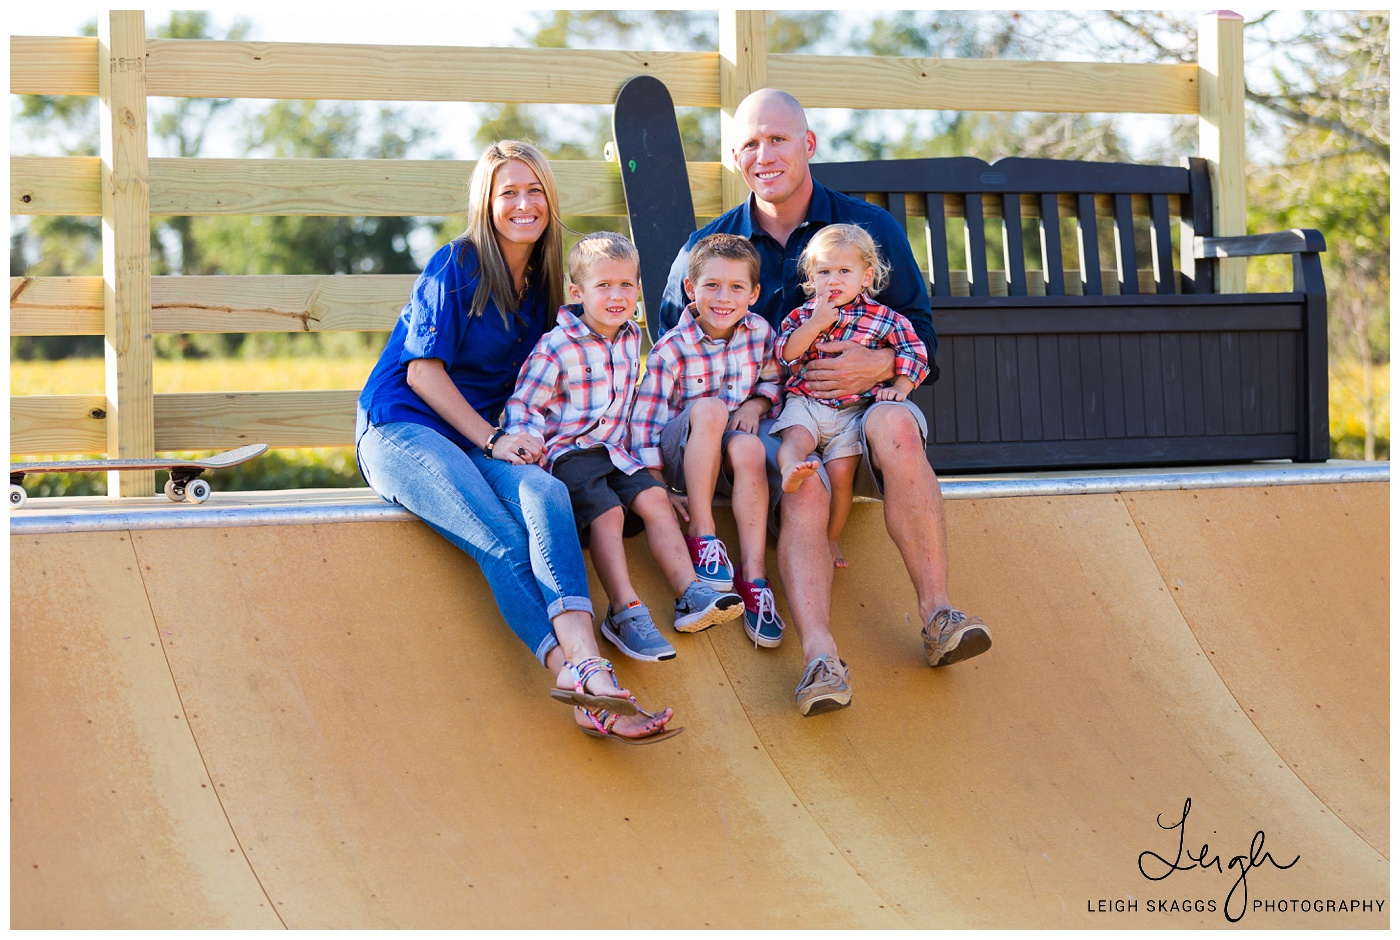 A Skateboarding Lifestyle Family Session in Pungo Virginia!